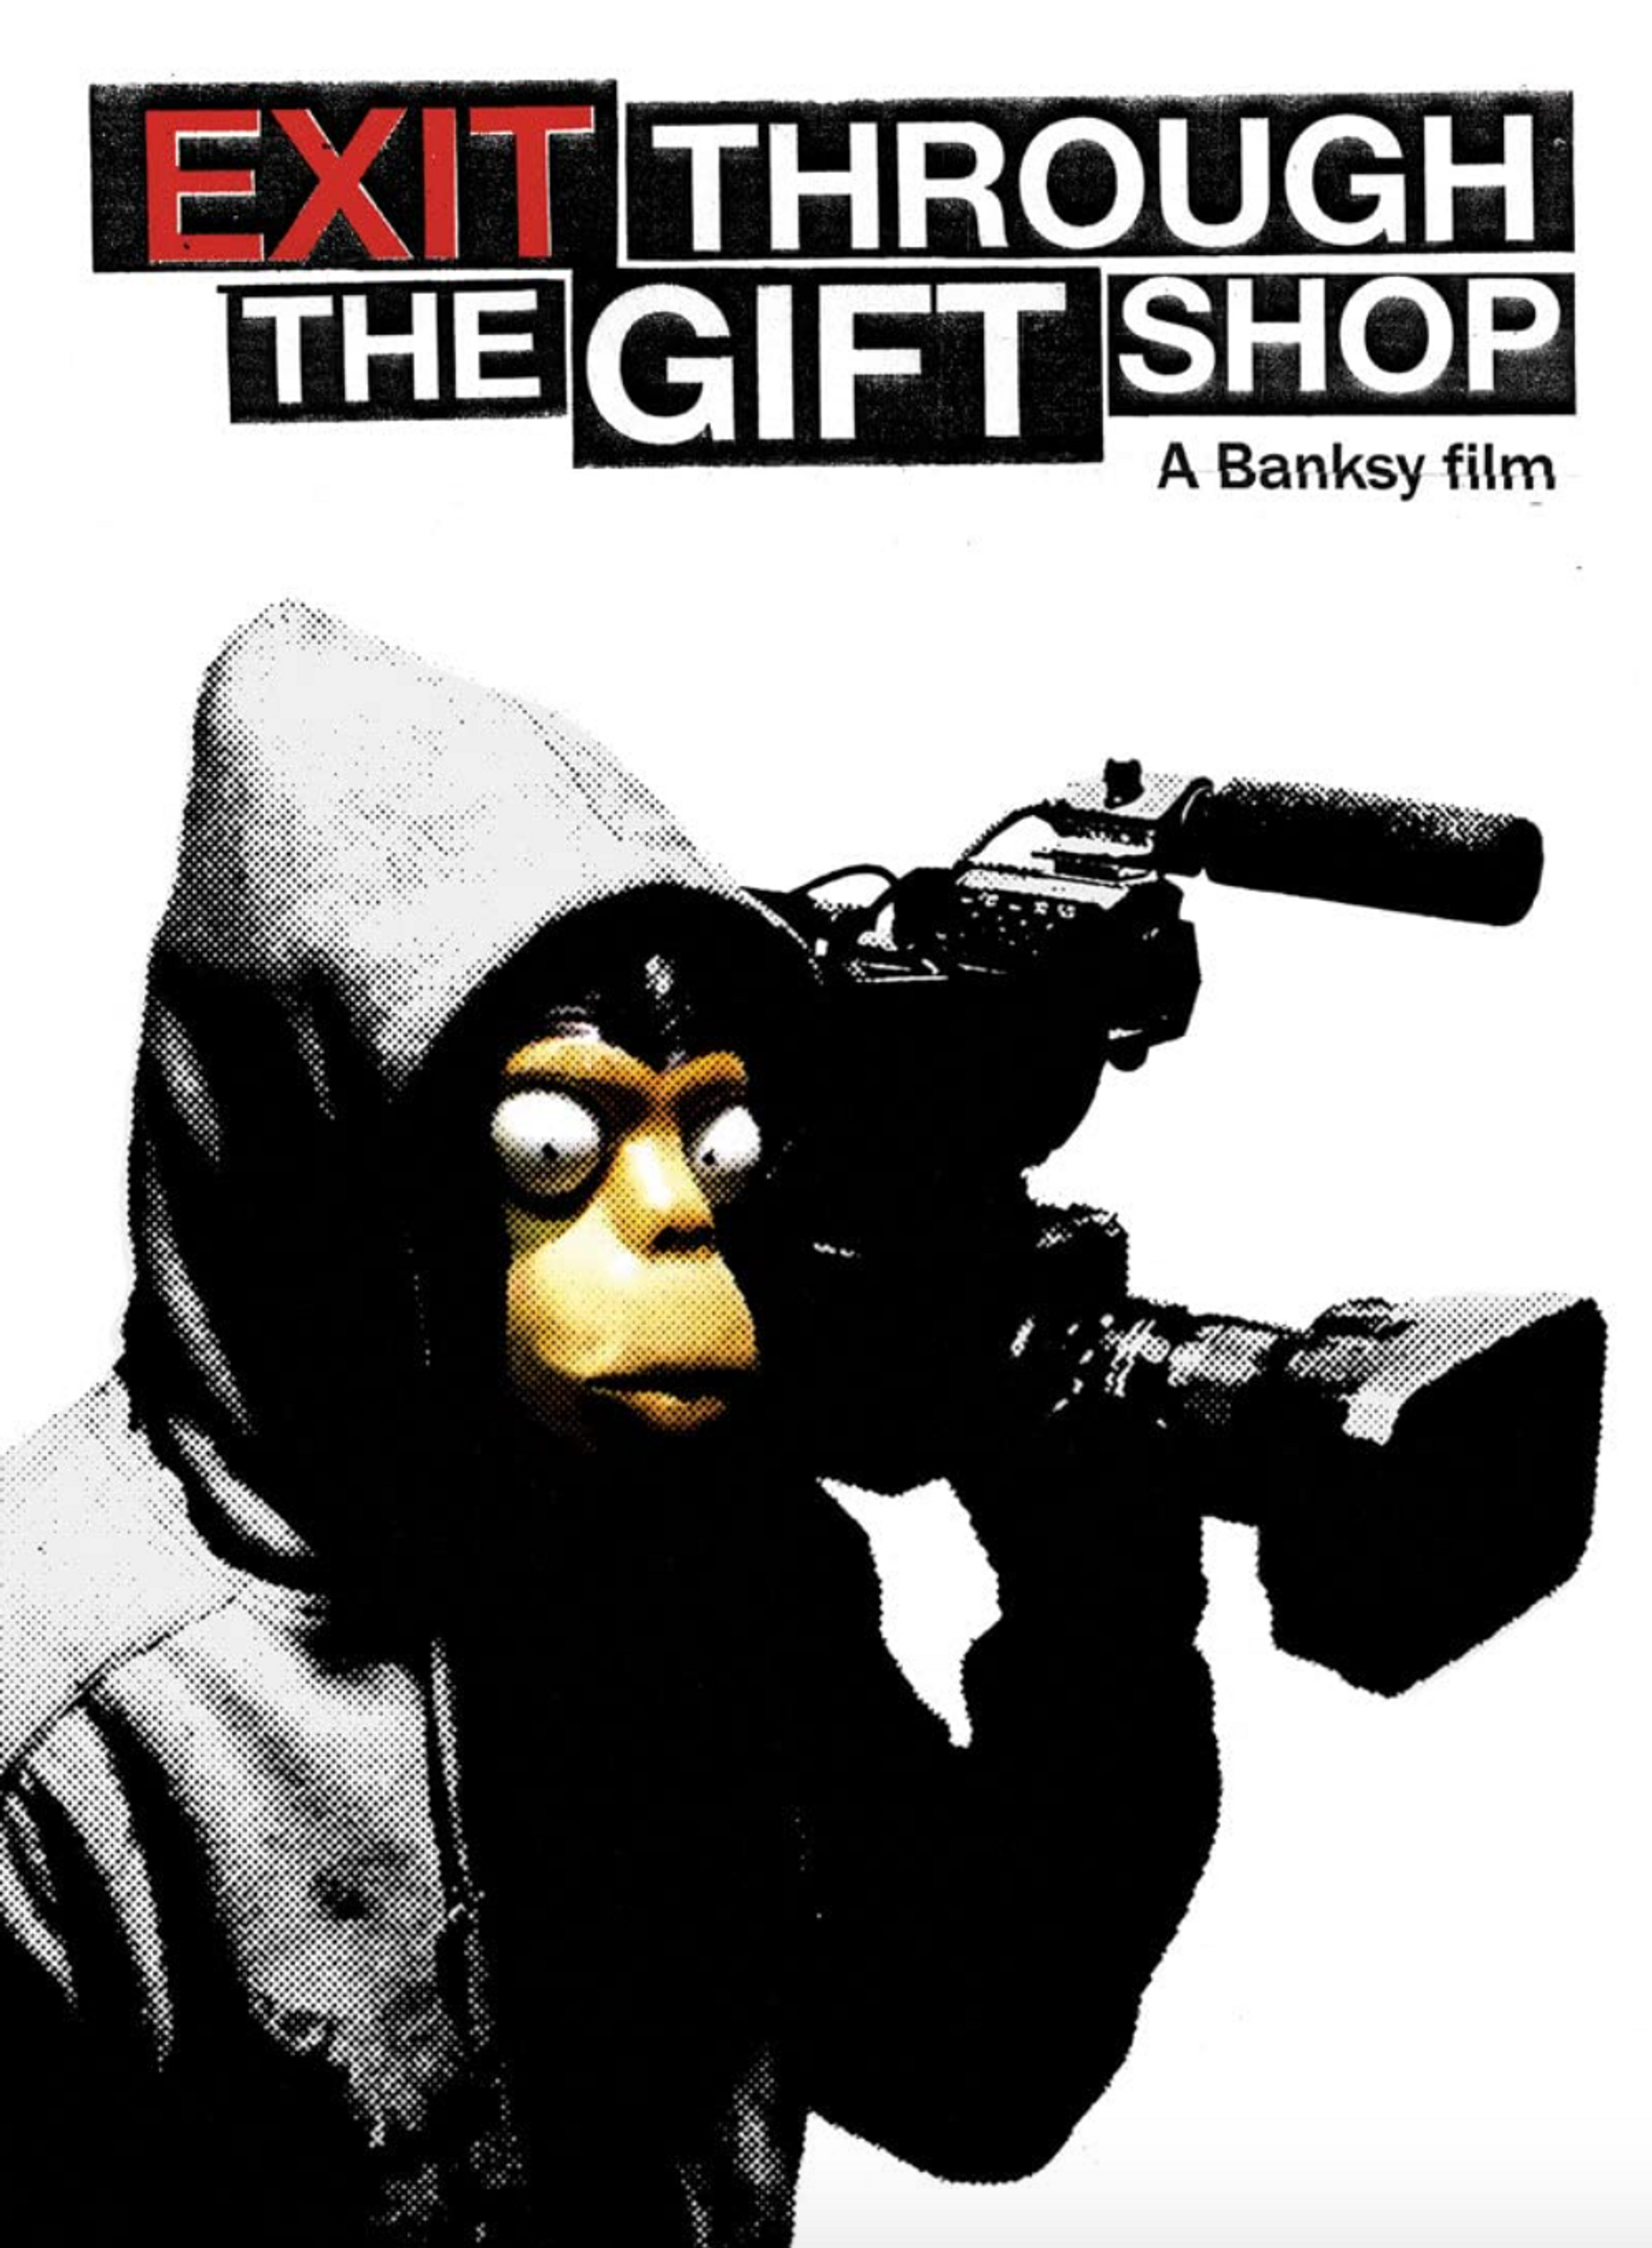 Exit Through The Gift Shop Film Poster by Banksy